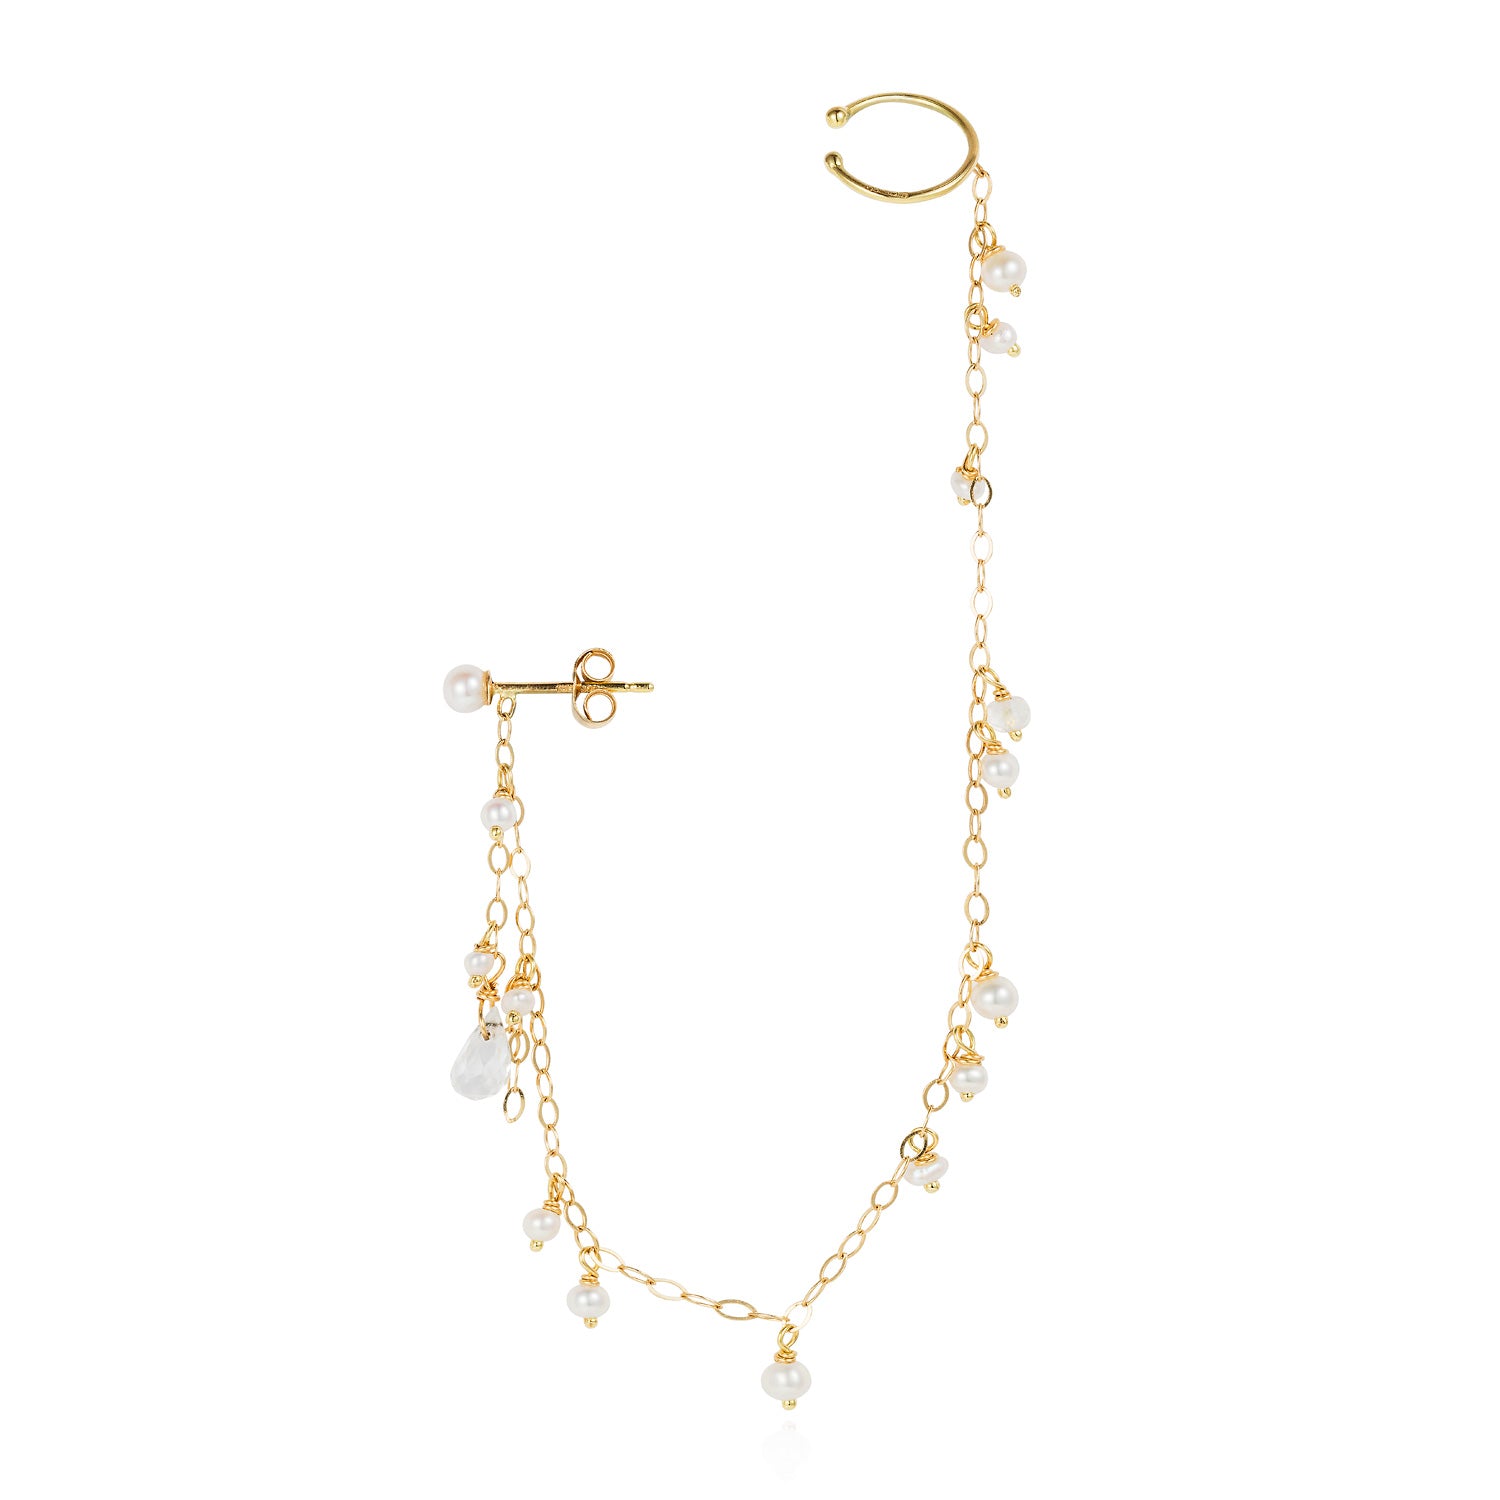 18ct yellow thread through long chain earring with ear cuff with seed Pearl and Moonstone